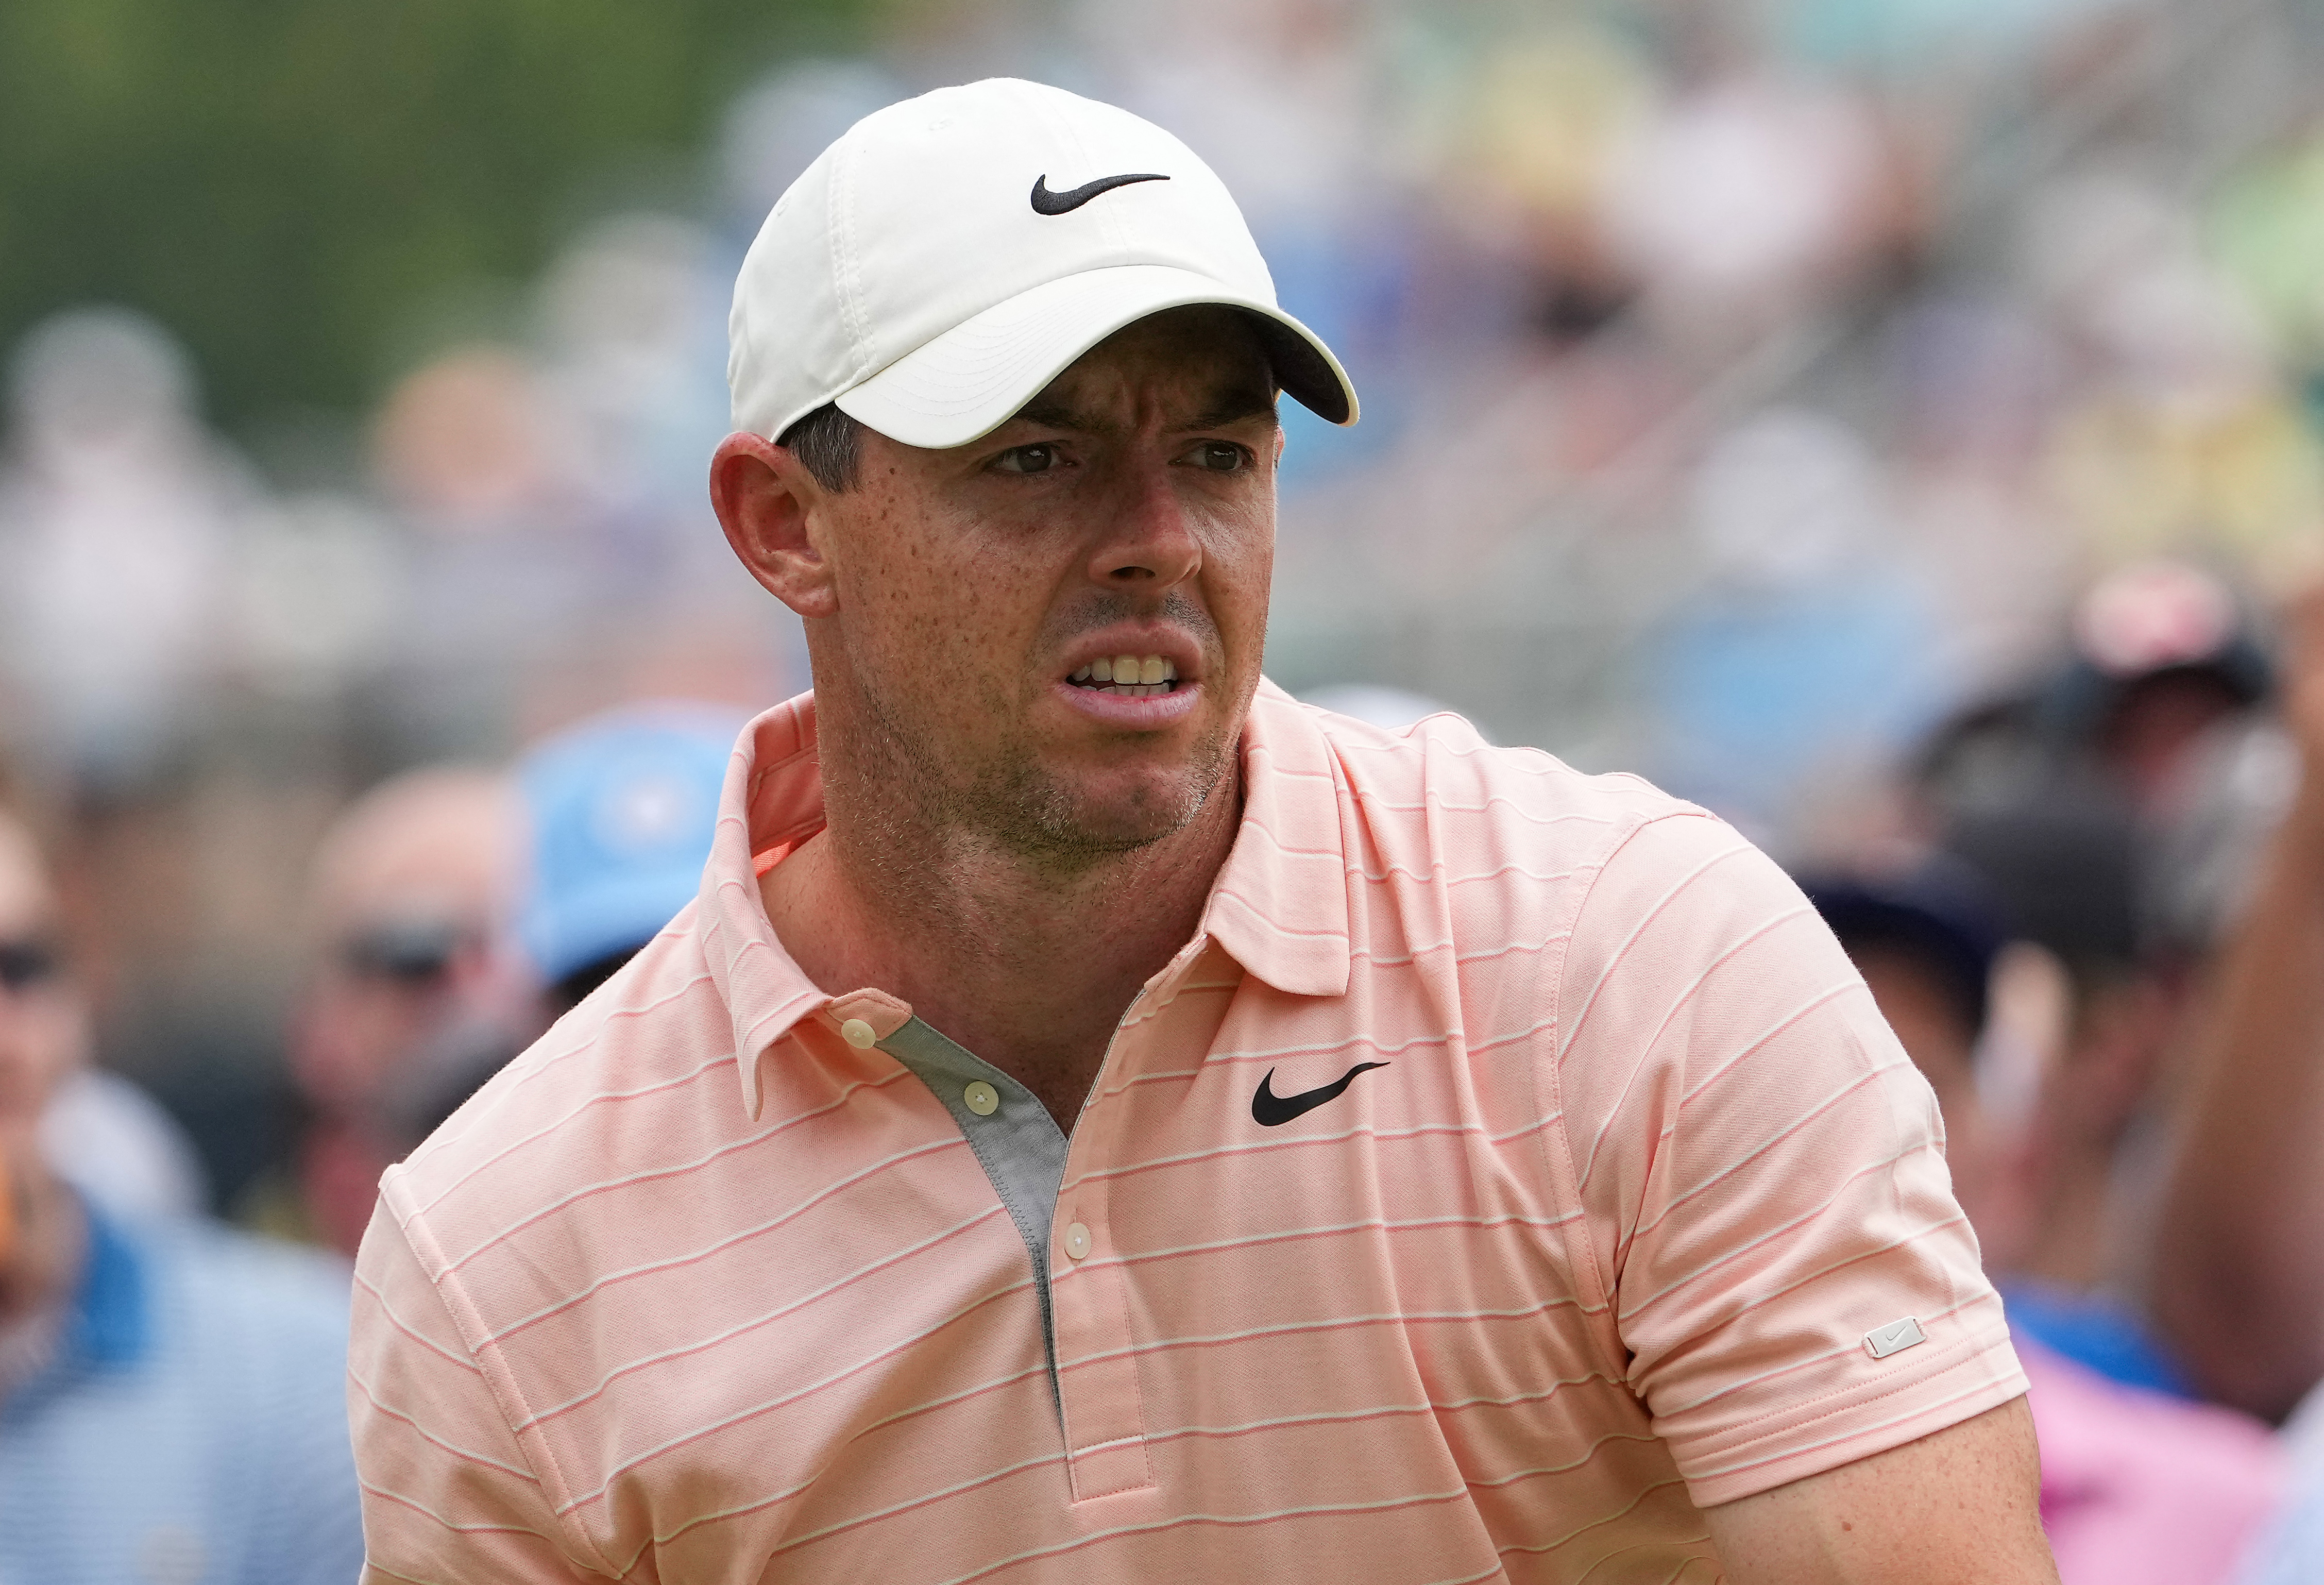 WATCH Rory McIlroy makes an 8 (!) on a par-4 at Travelers Championship GolfMagic